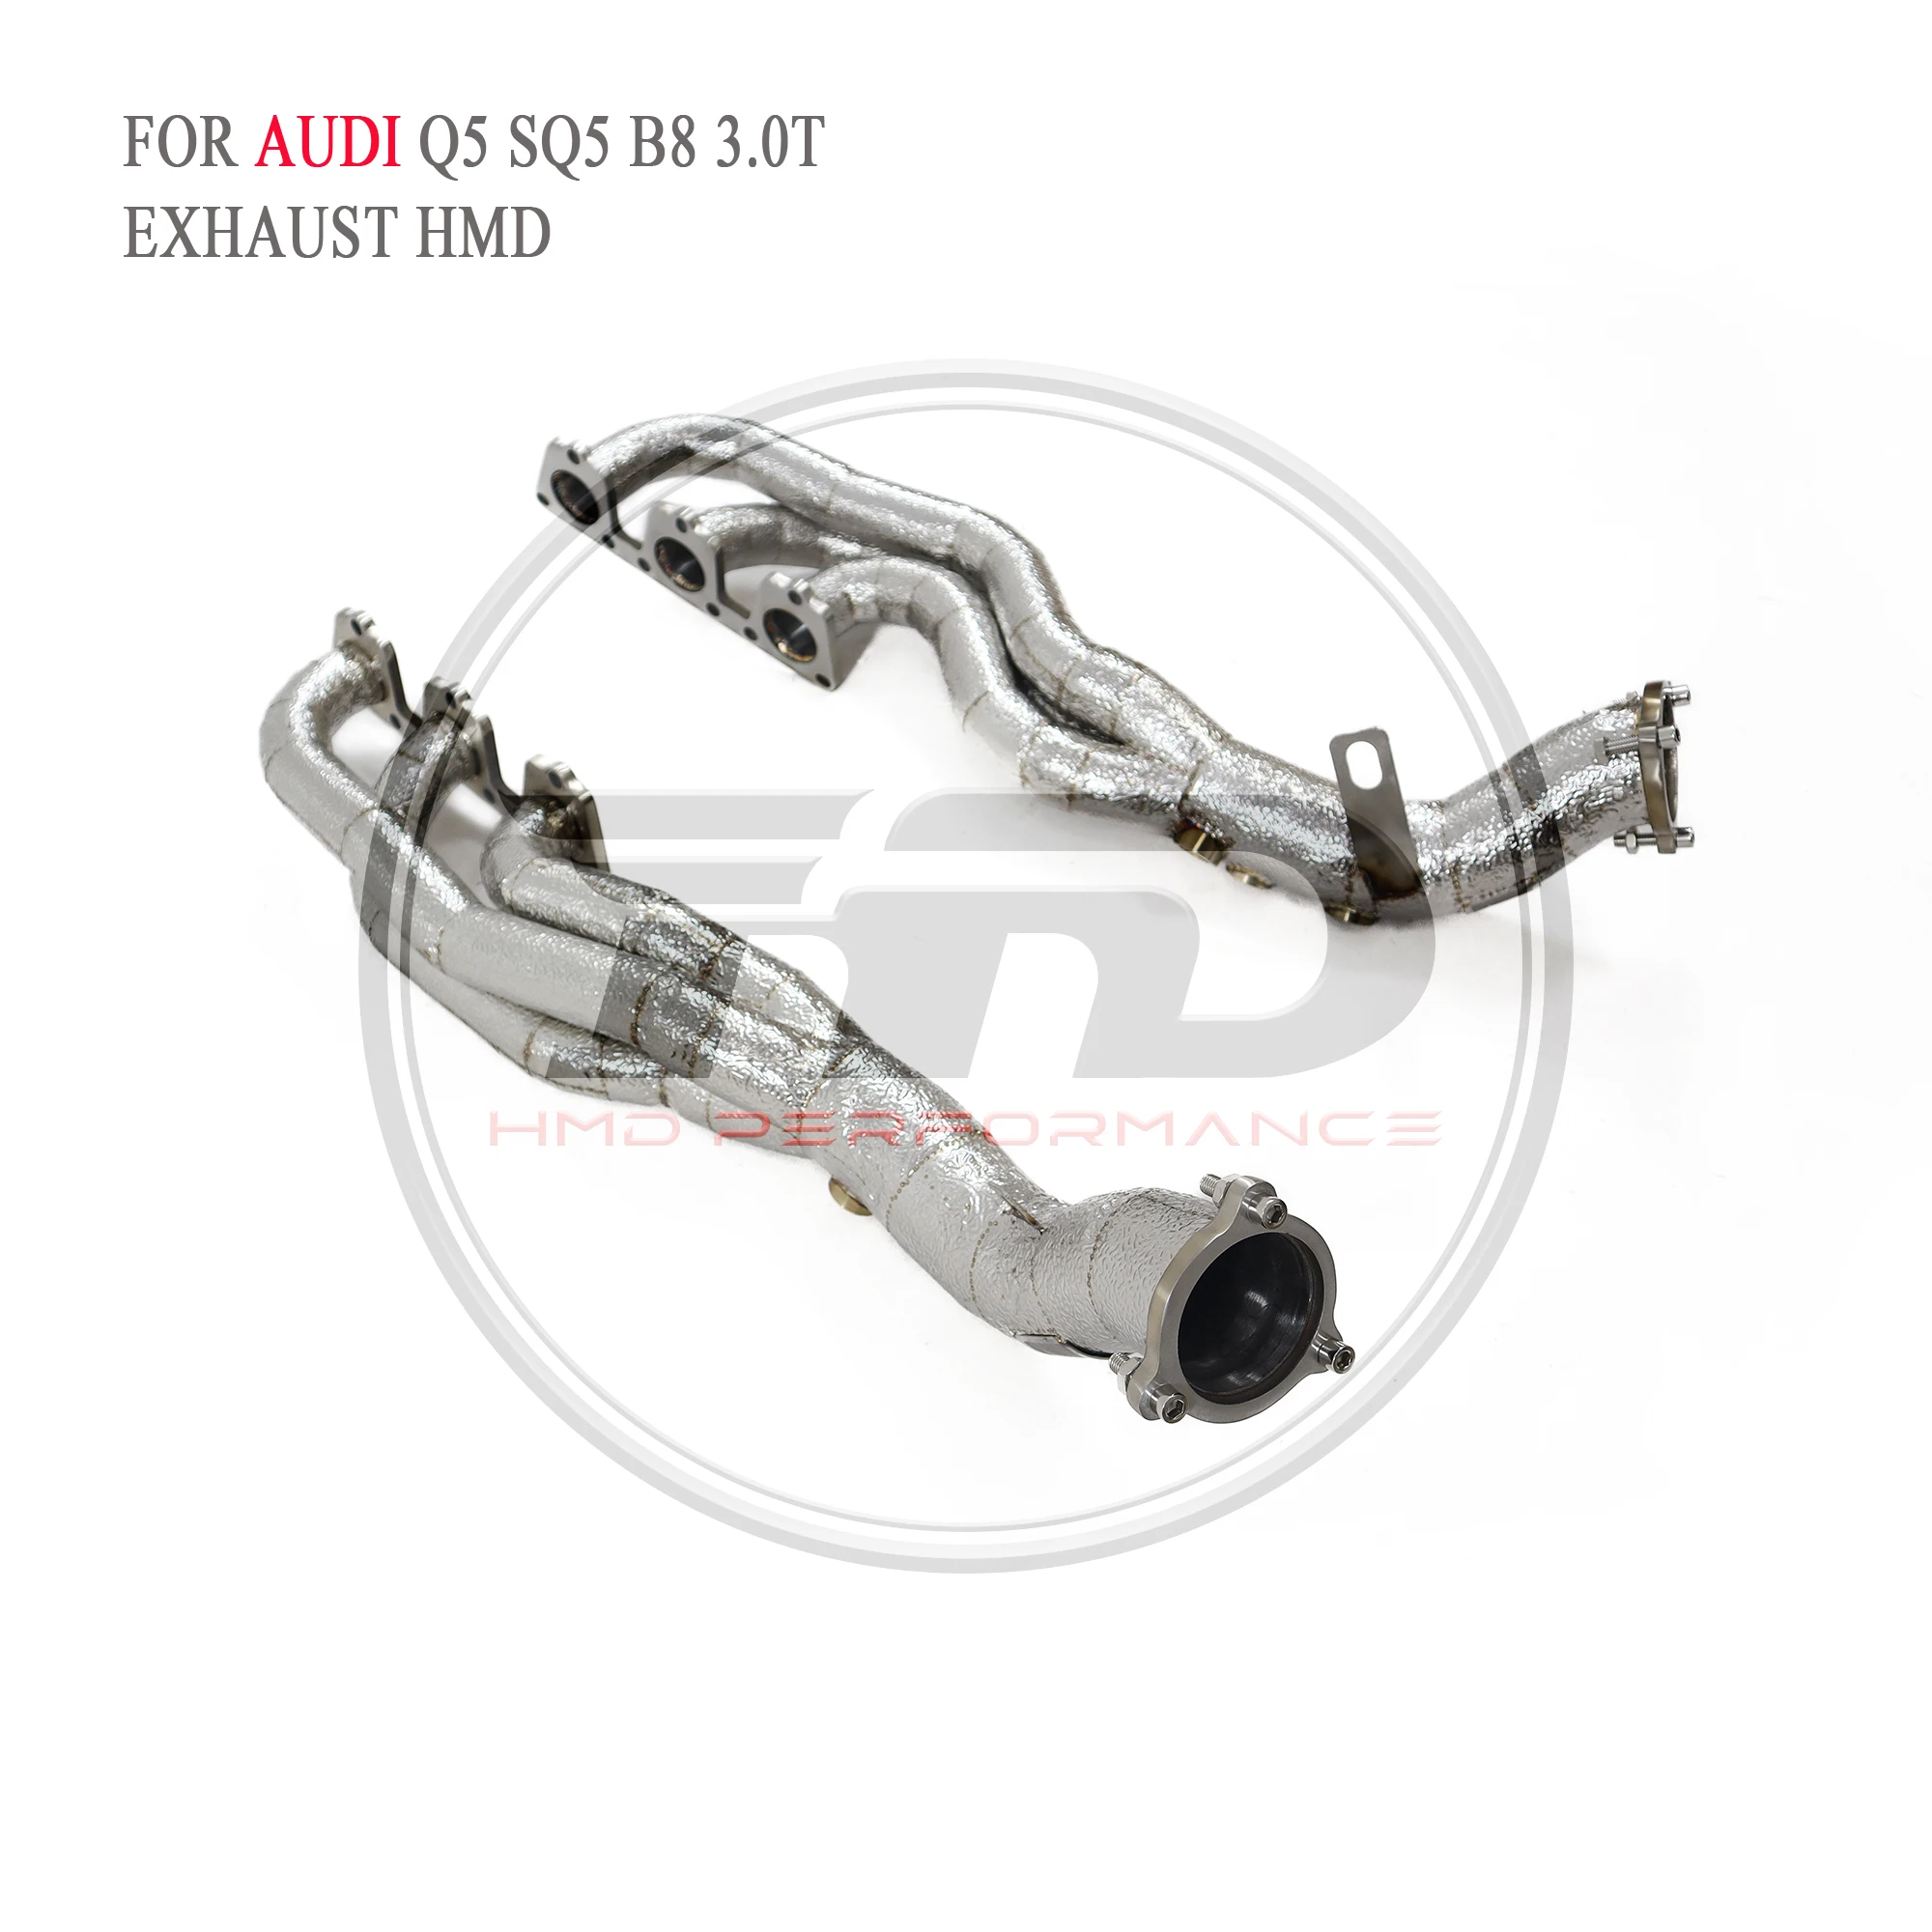 

HMD stainless steel exhaust manifold downpipe for Audi Q5 SQ5 B8 3.0T with catalytic head no cat auto accessories